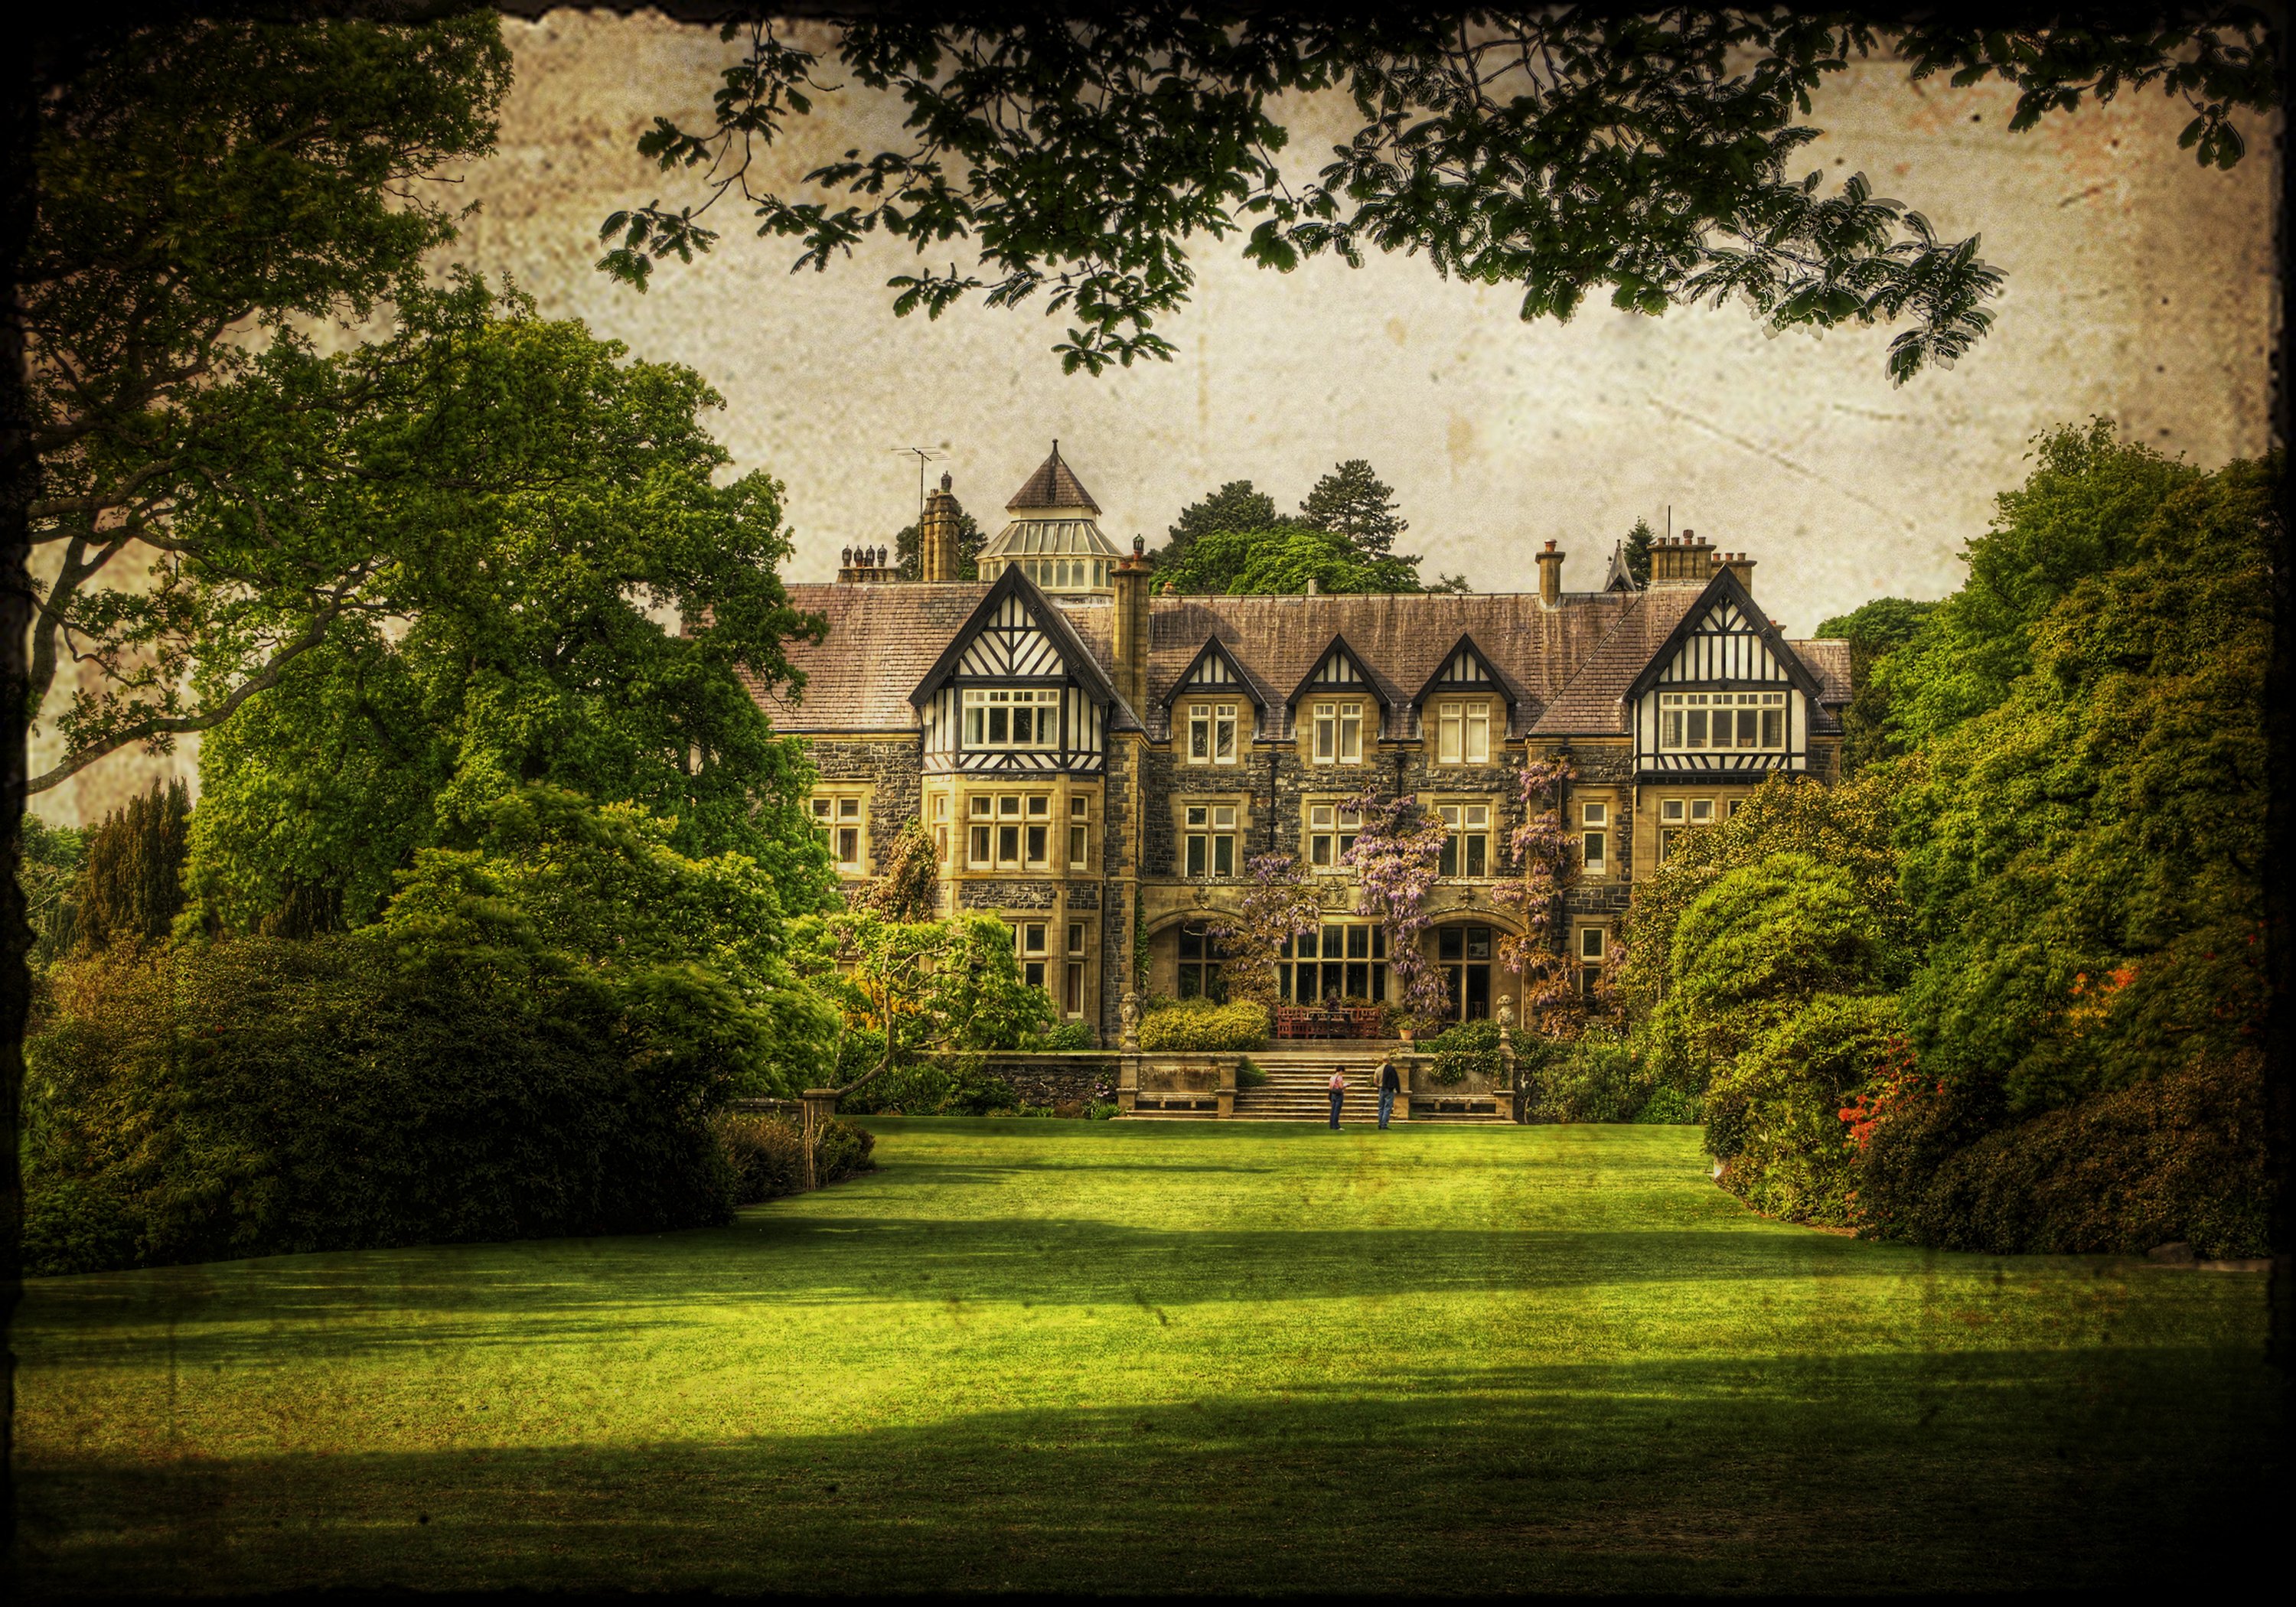 united, Kingdom, Houses, Parks, Lawn, Shrubs, Bodnant, Gardens, Wales, Cities Wallpaper